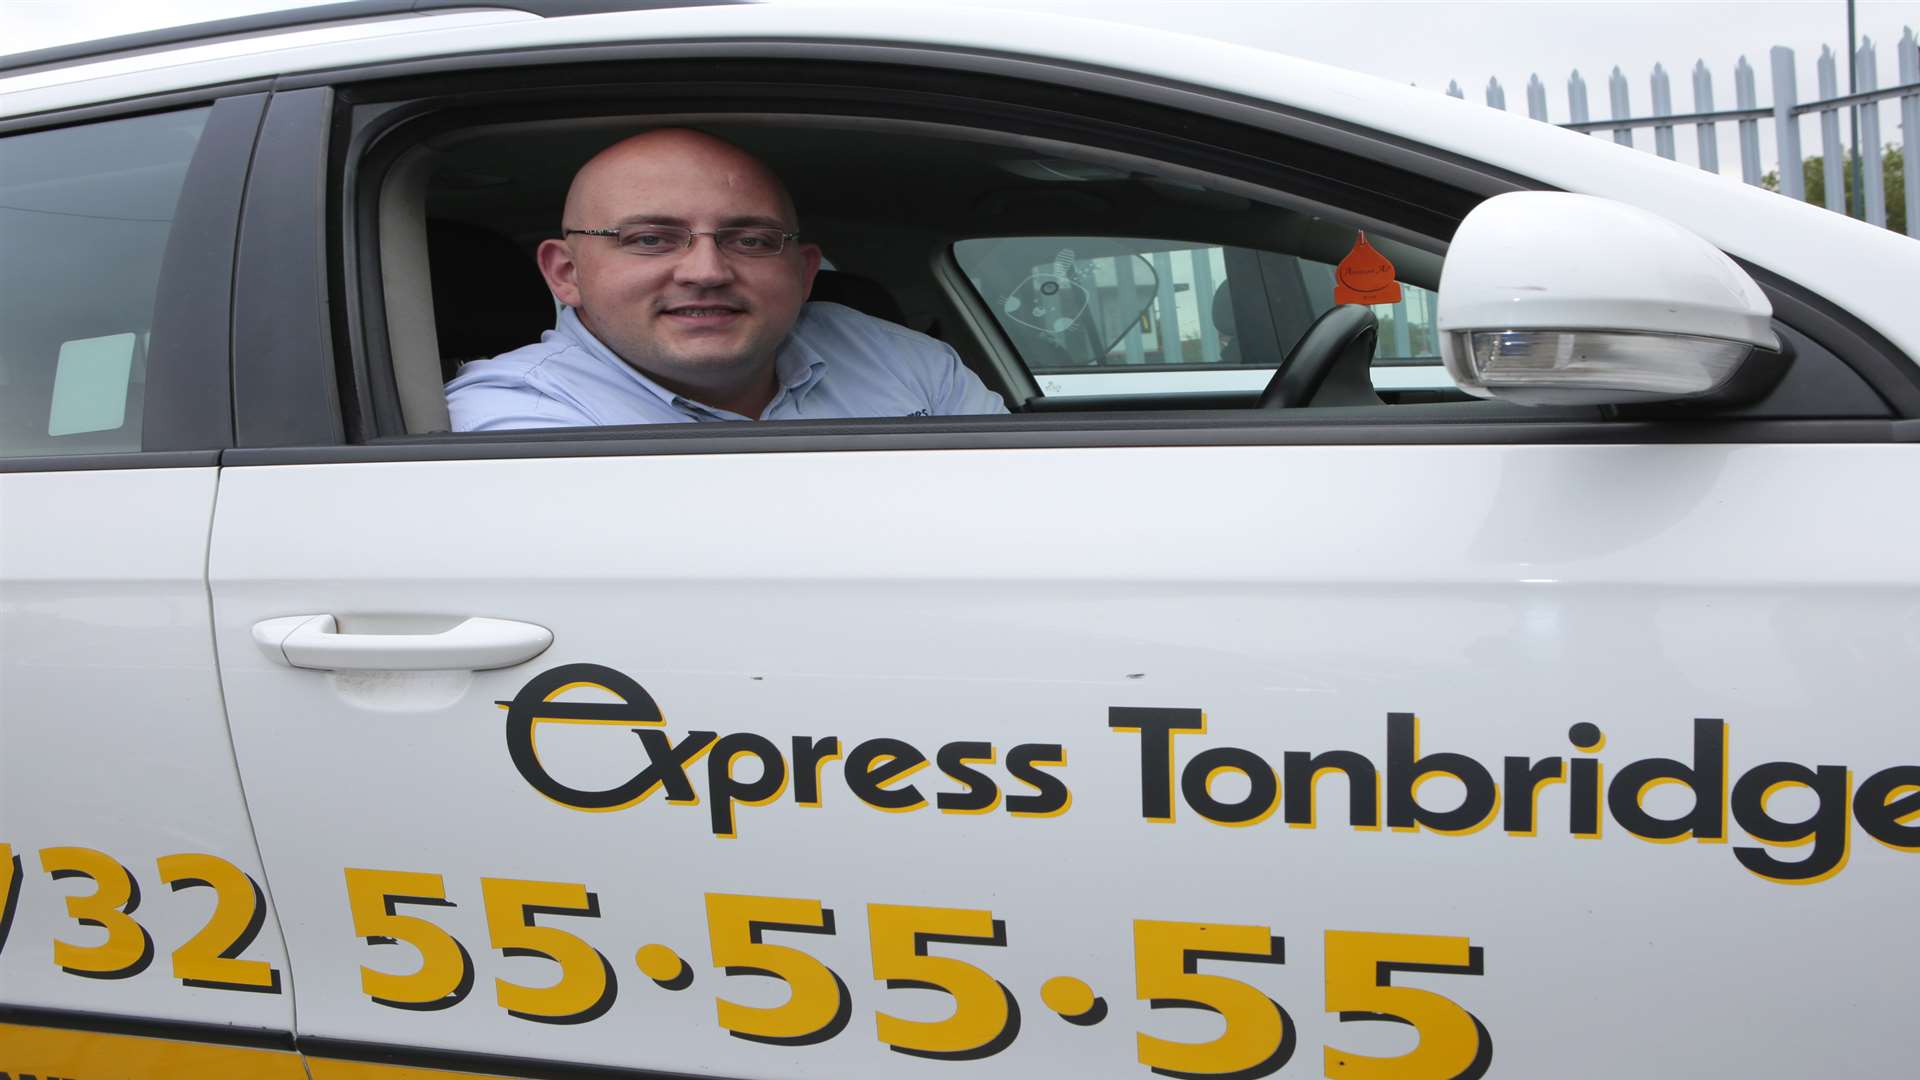 Jason Brown, manager of Express Cabs, said the training made him realise drivers are in a good position to help look out for possible victims of abuse